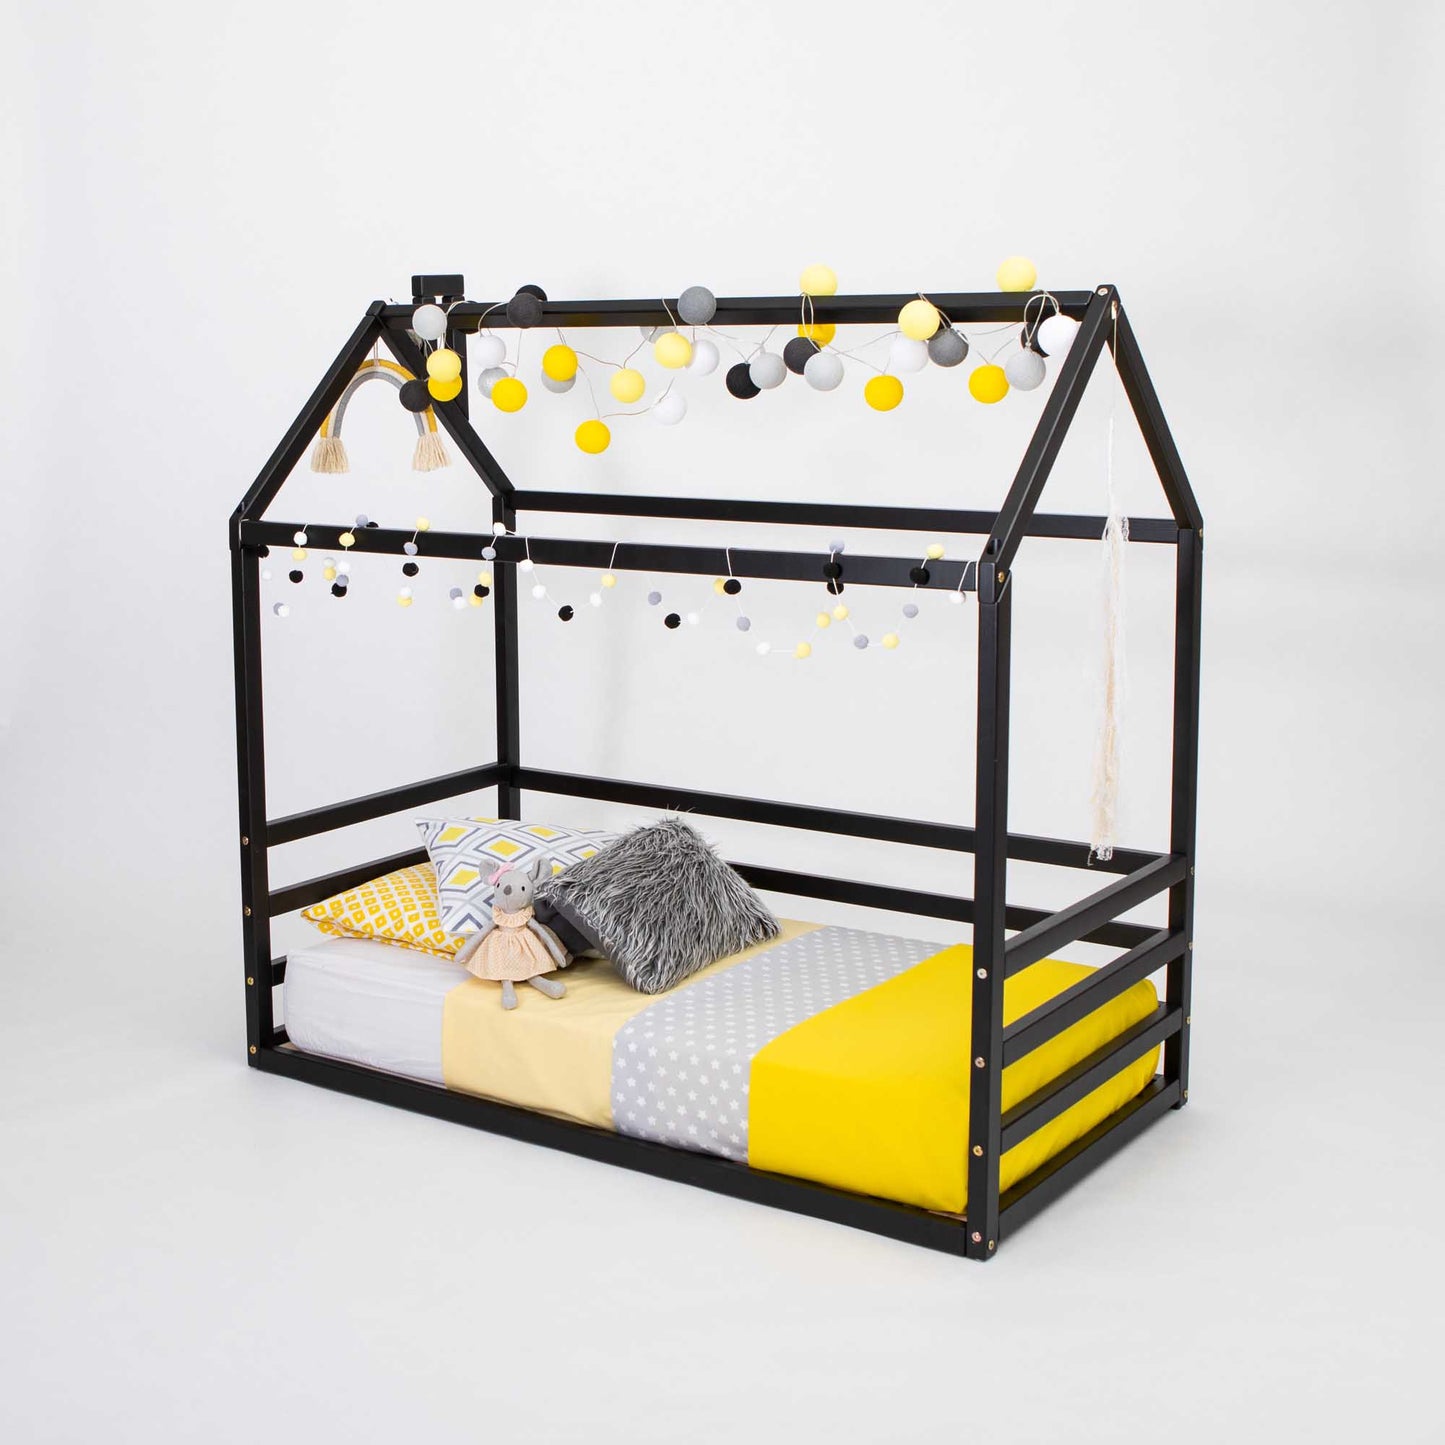 A black low kids' house-frame bed adorned with yellow pom poms.